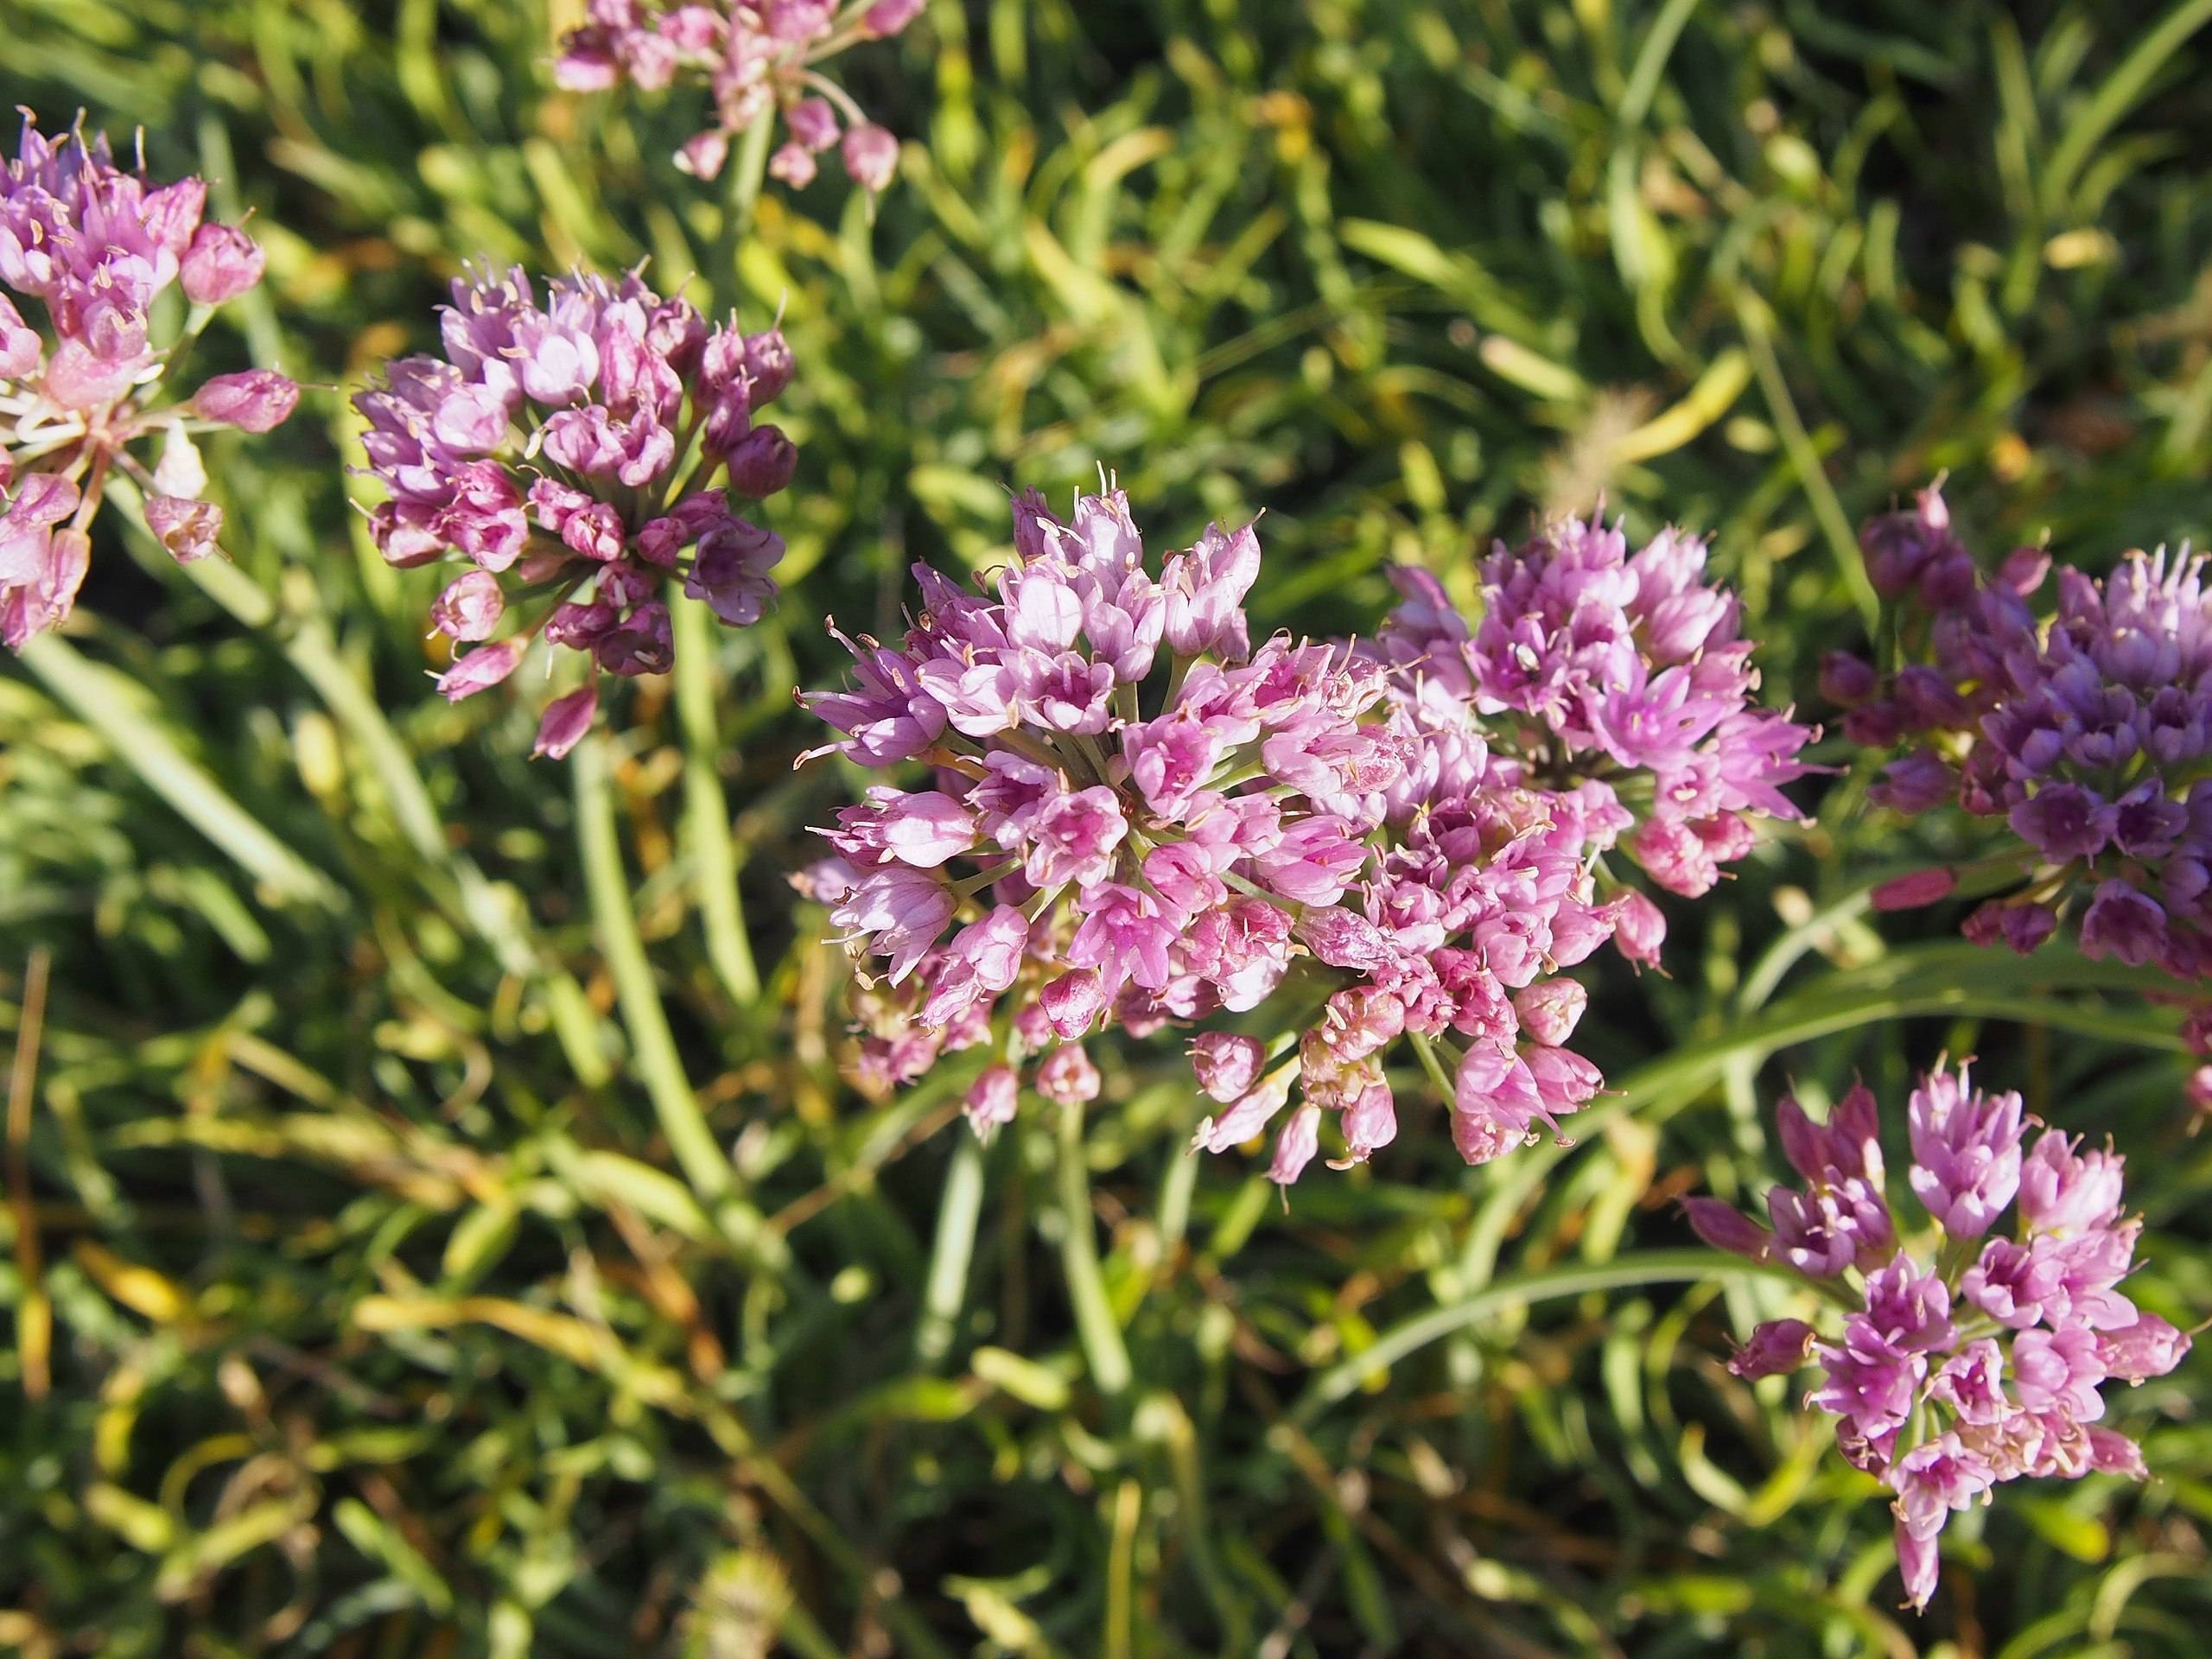 pink-purple flowers with green foliage and stems